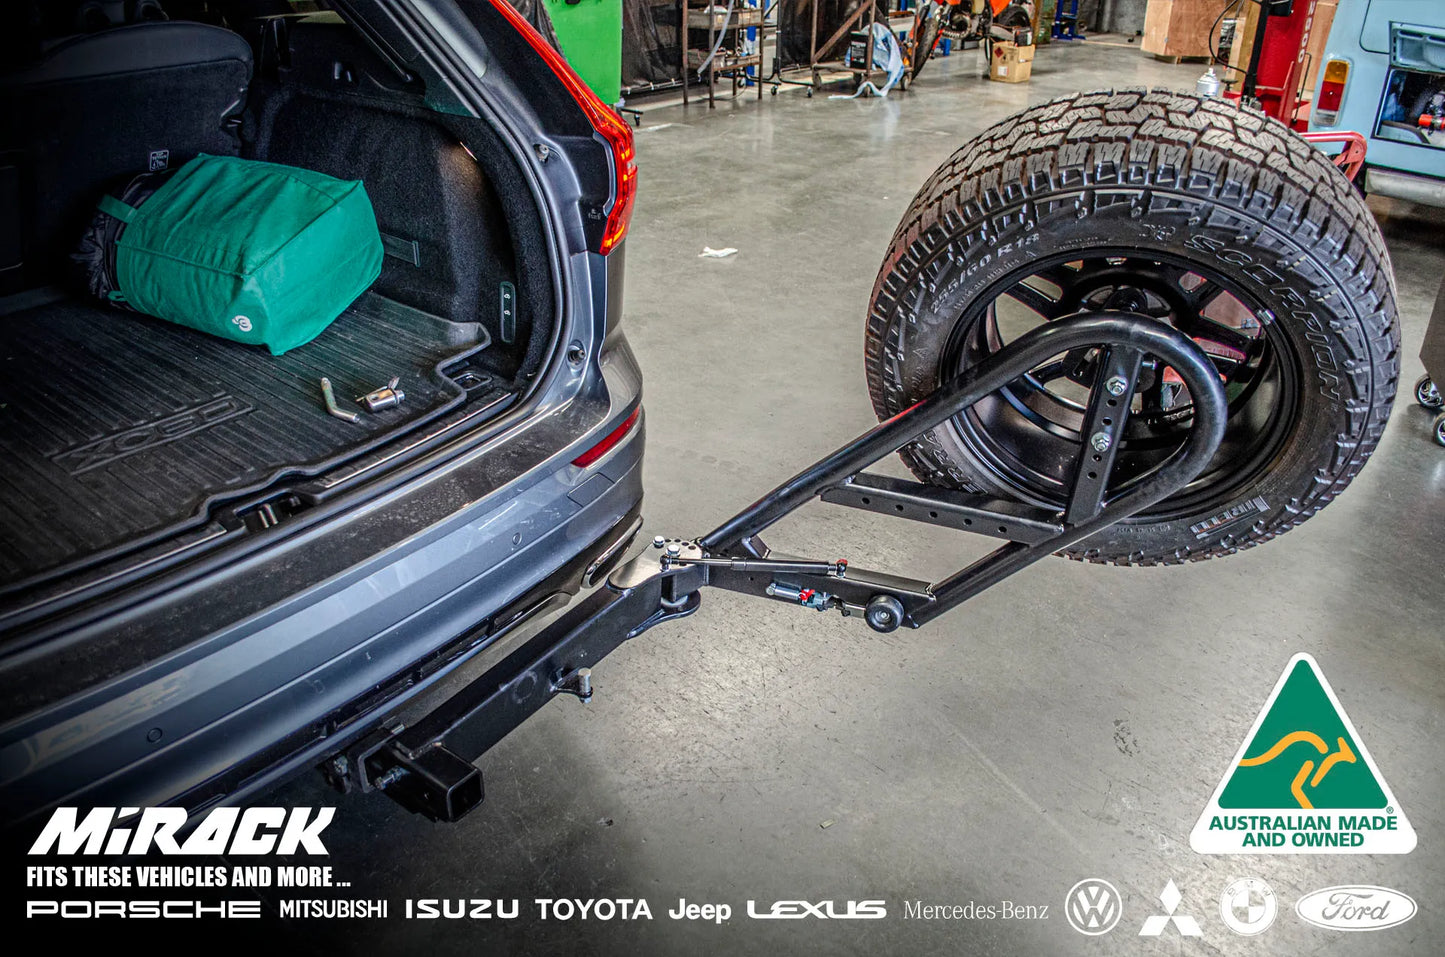 Volvo XC60 conquers adventures with Mirack's swinging spare tyre carrier (hitch mount).